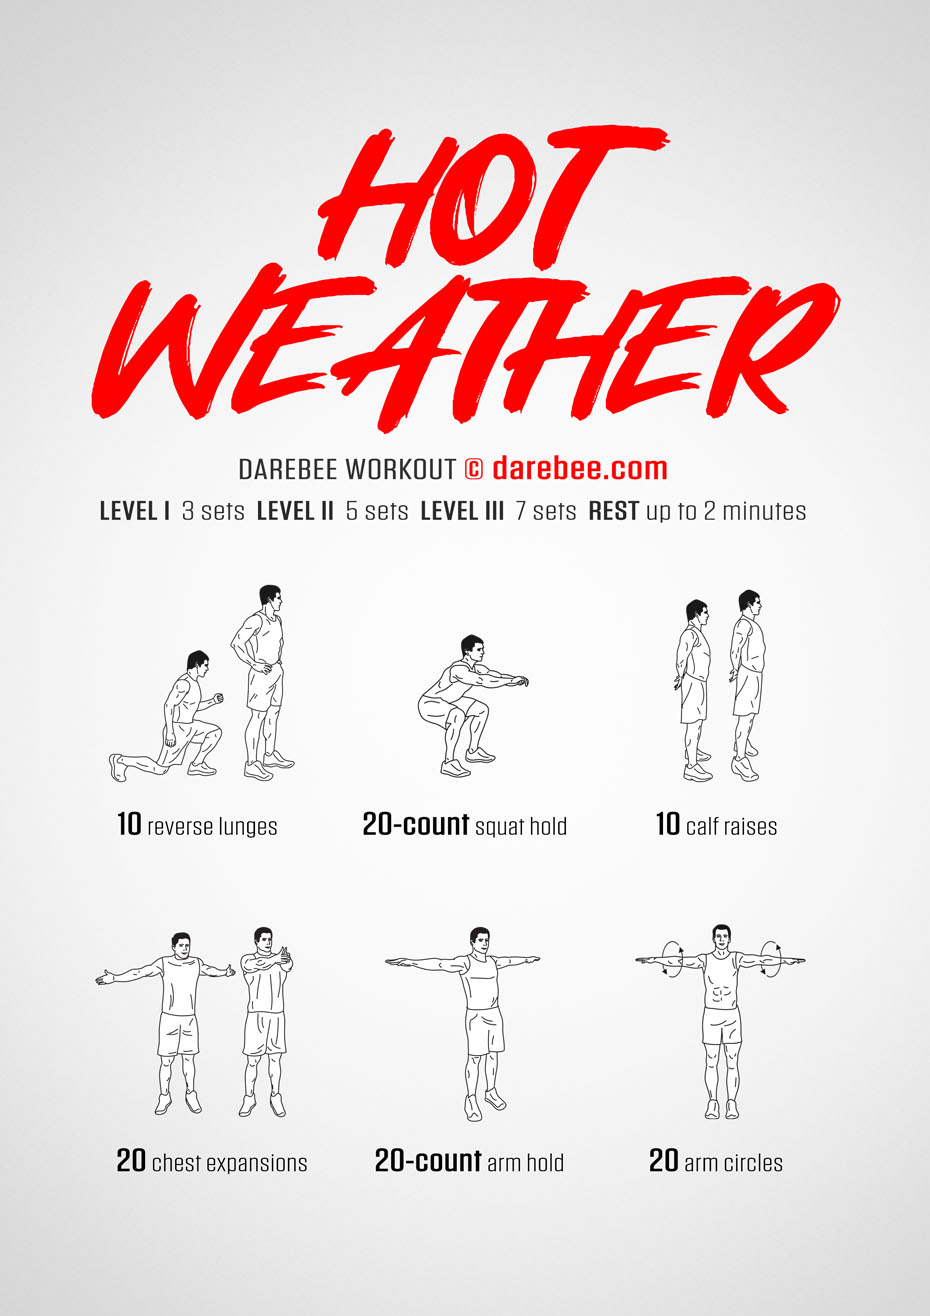 Hot Weather is a Darebee home-fitness workout that will help you get stronger in the comfort of your own home. 